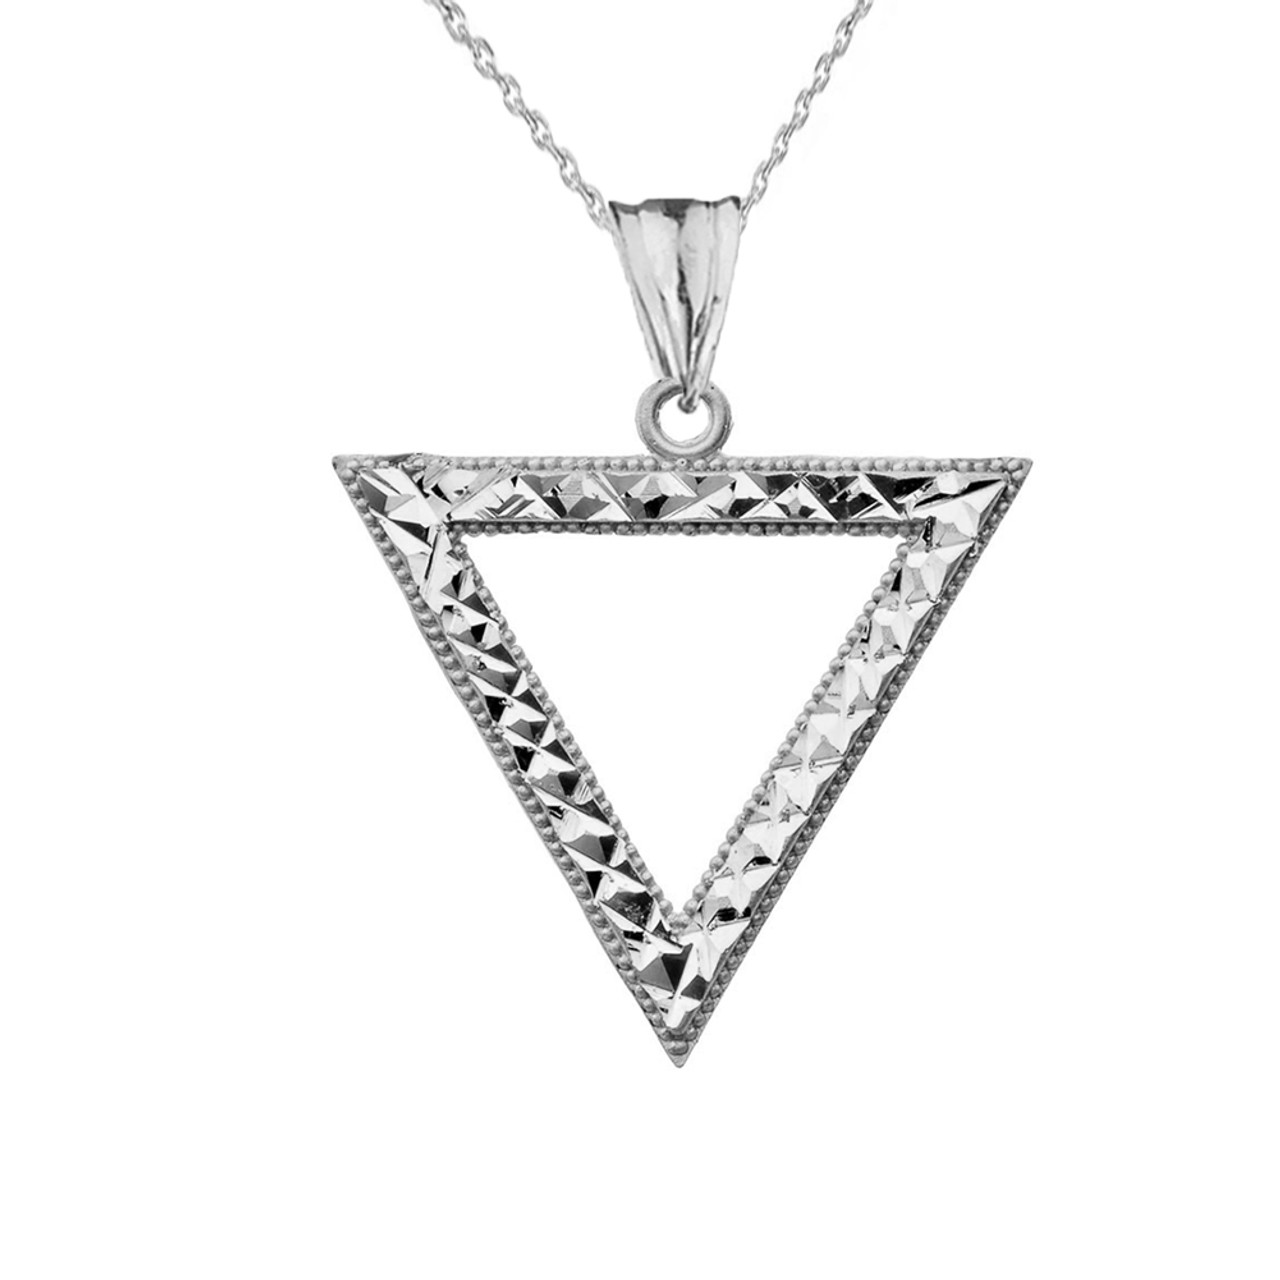 Men's Silver Necklace with Eye of Ra Triangle and Hamsa Hand Pendant